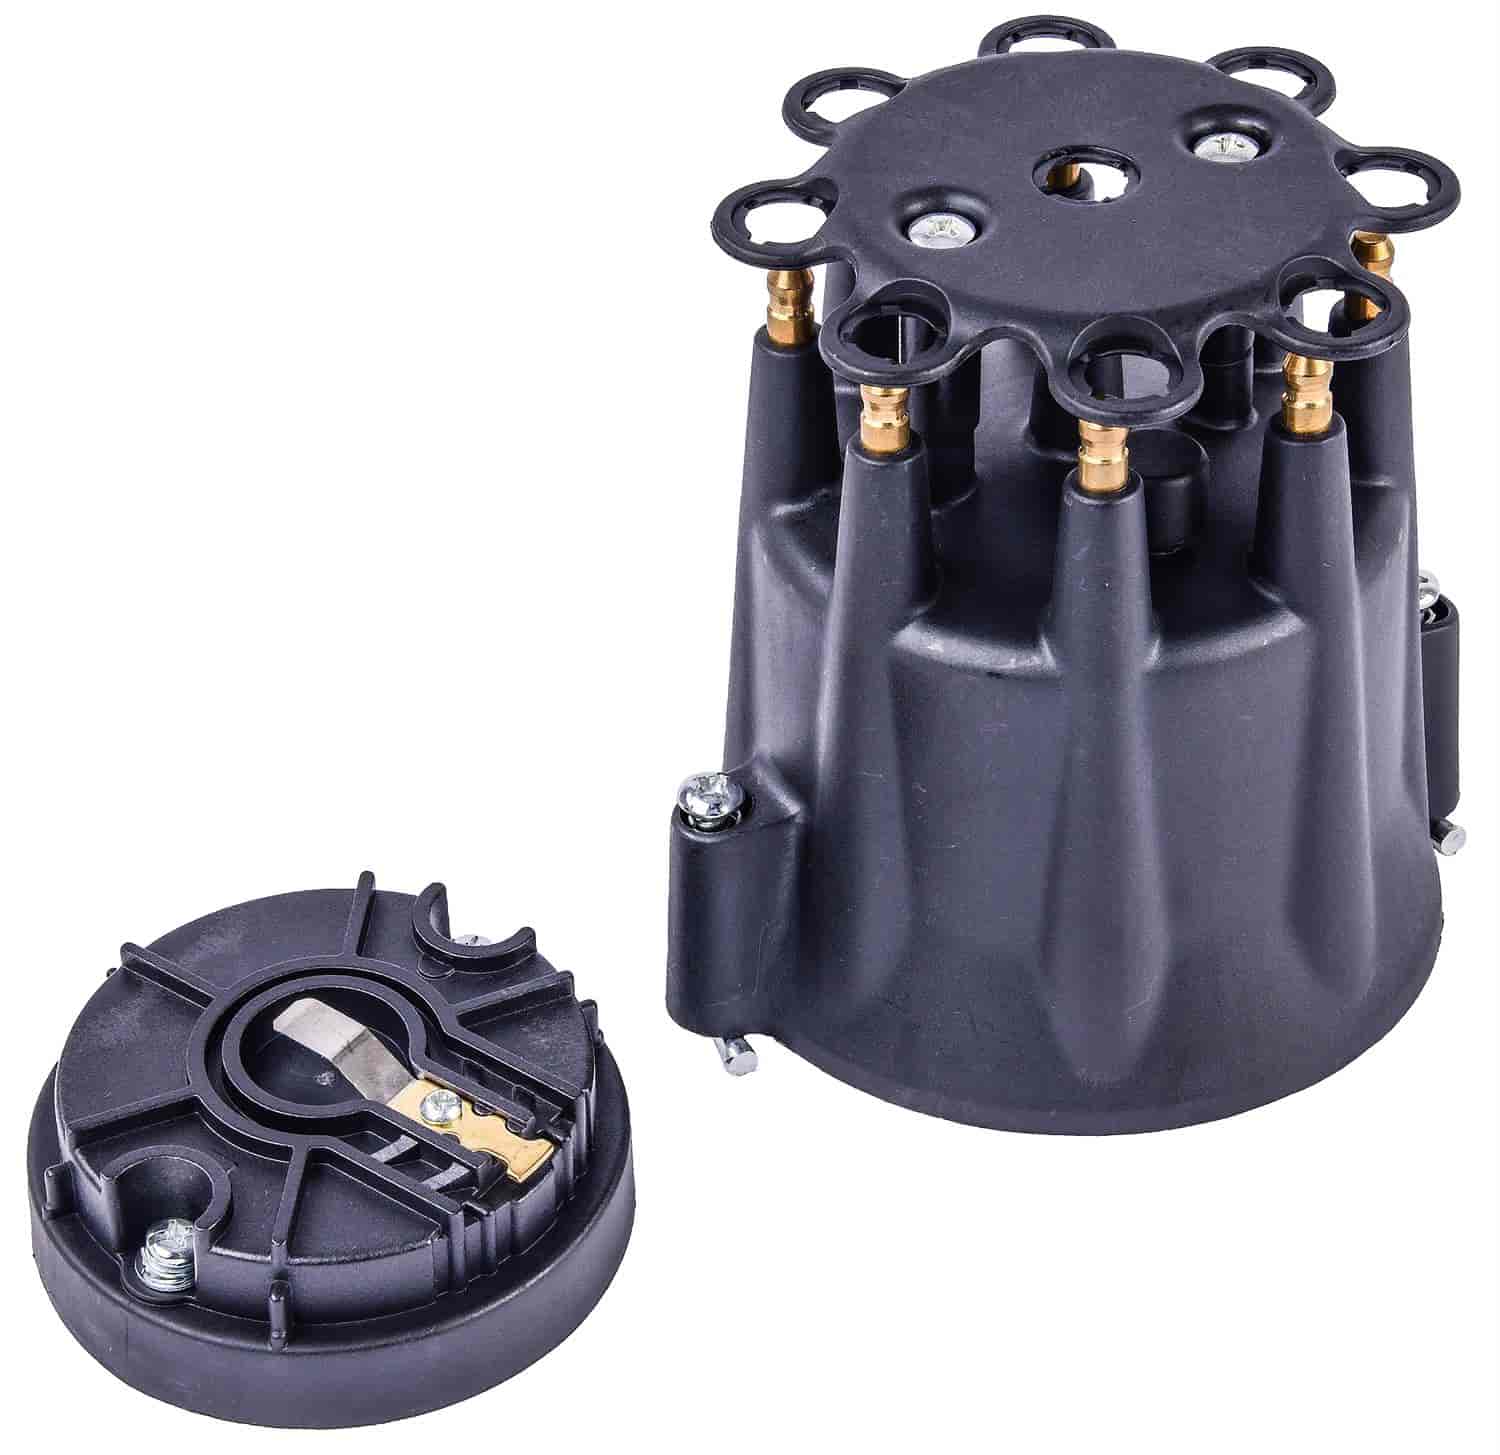 Replacement Distributor Cap & Rotor for JEGS SSR-III RTR Distributors [Black]